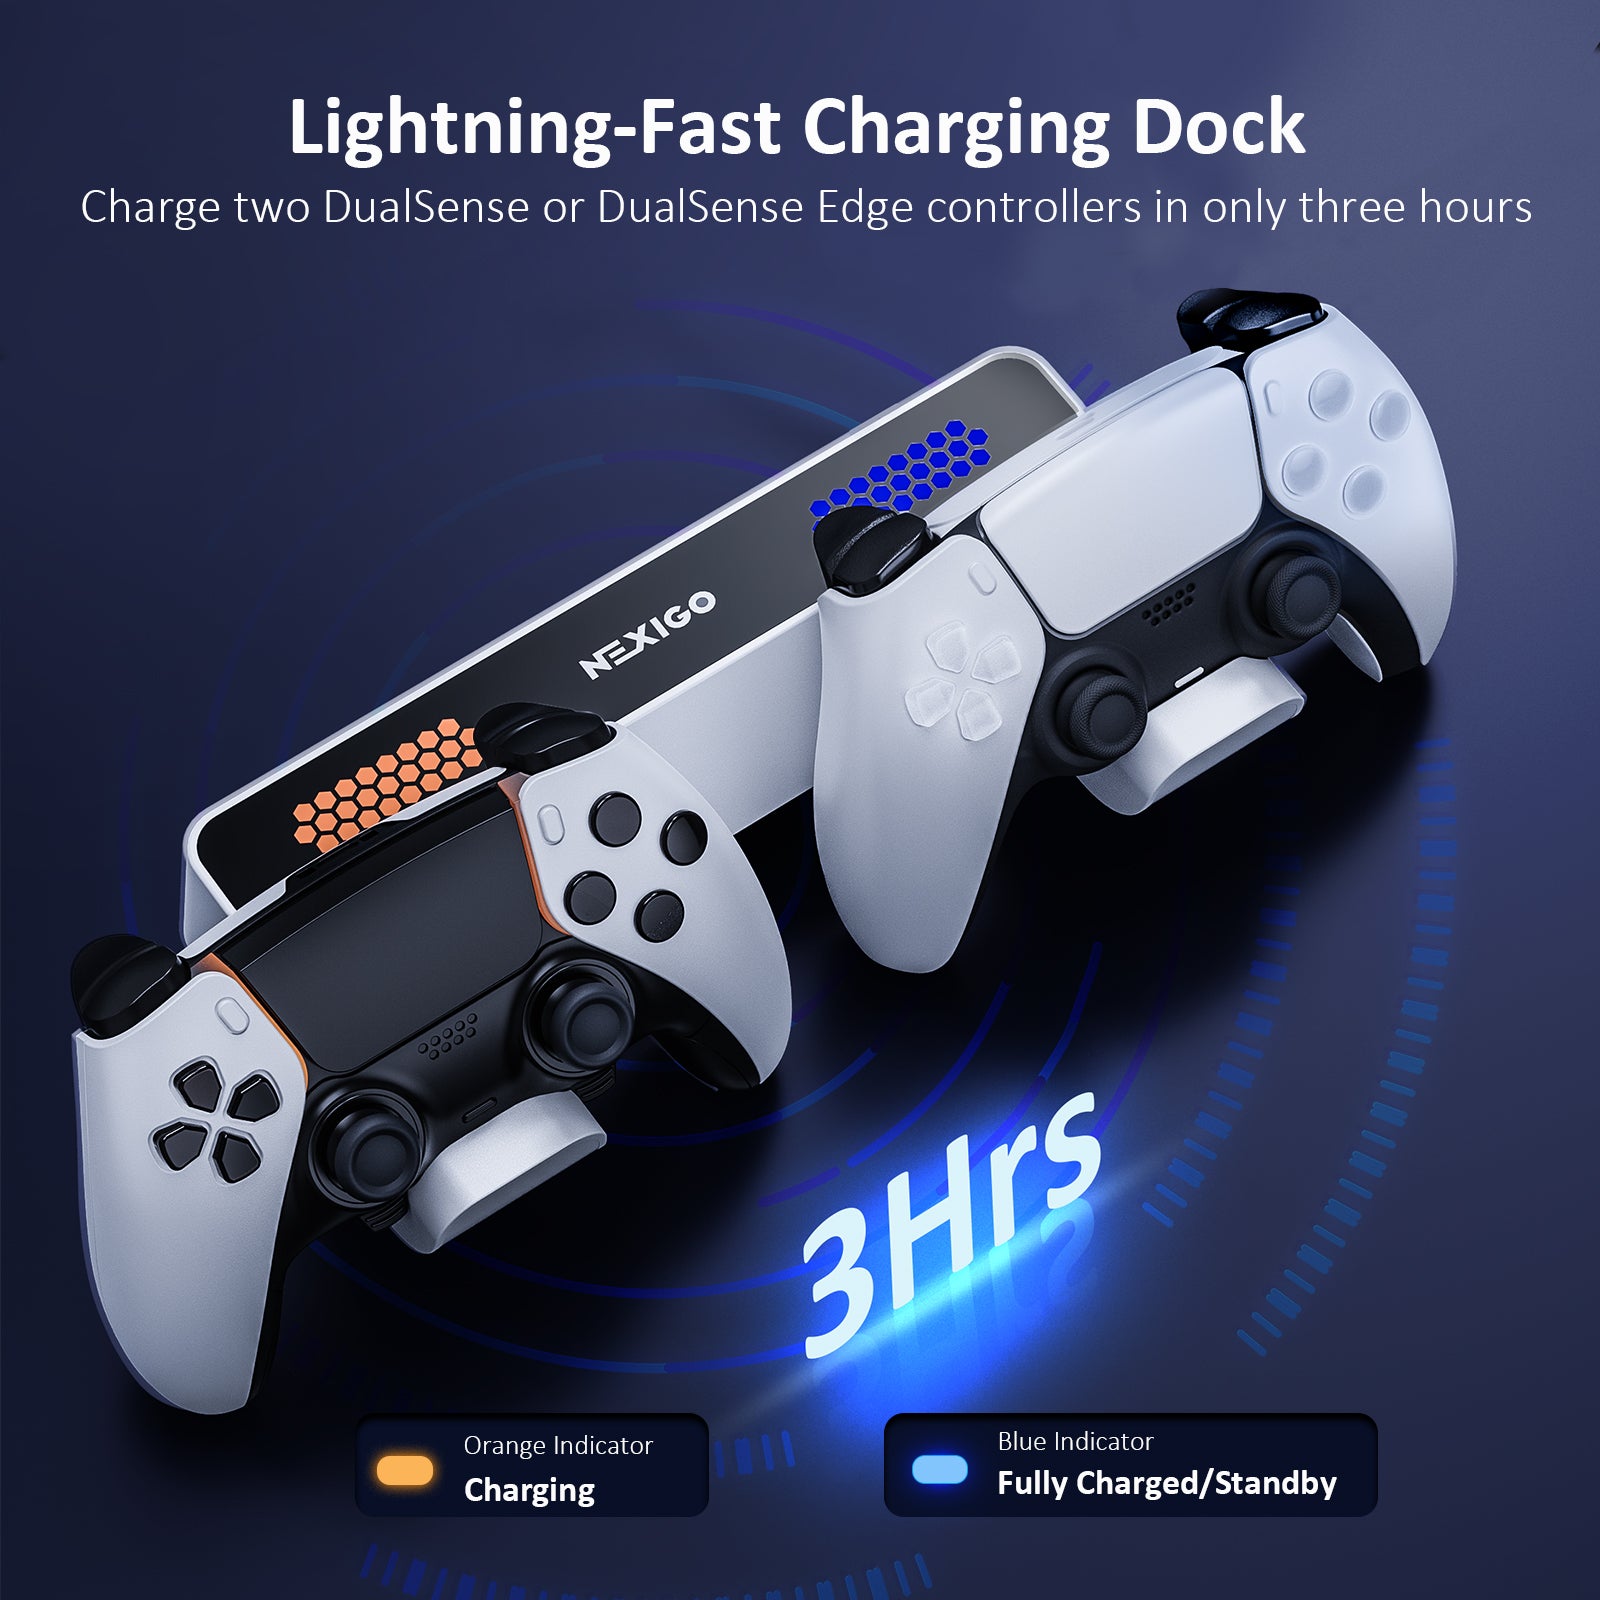 Displaying the charging indicator lights on the charging dock.